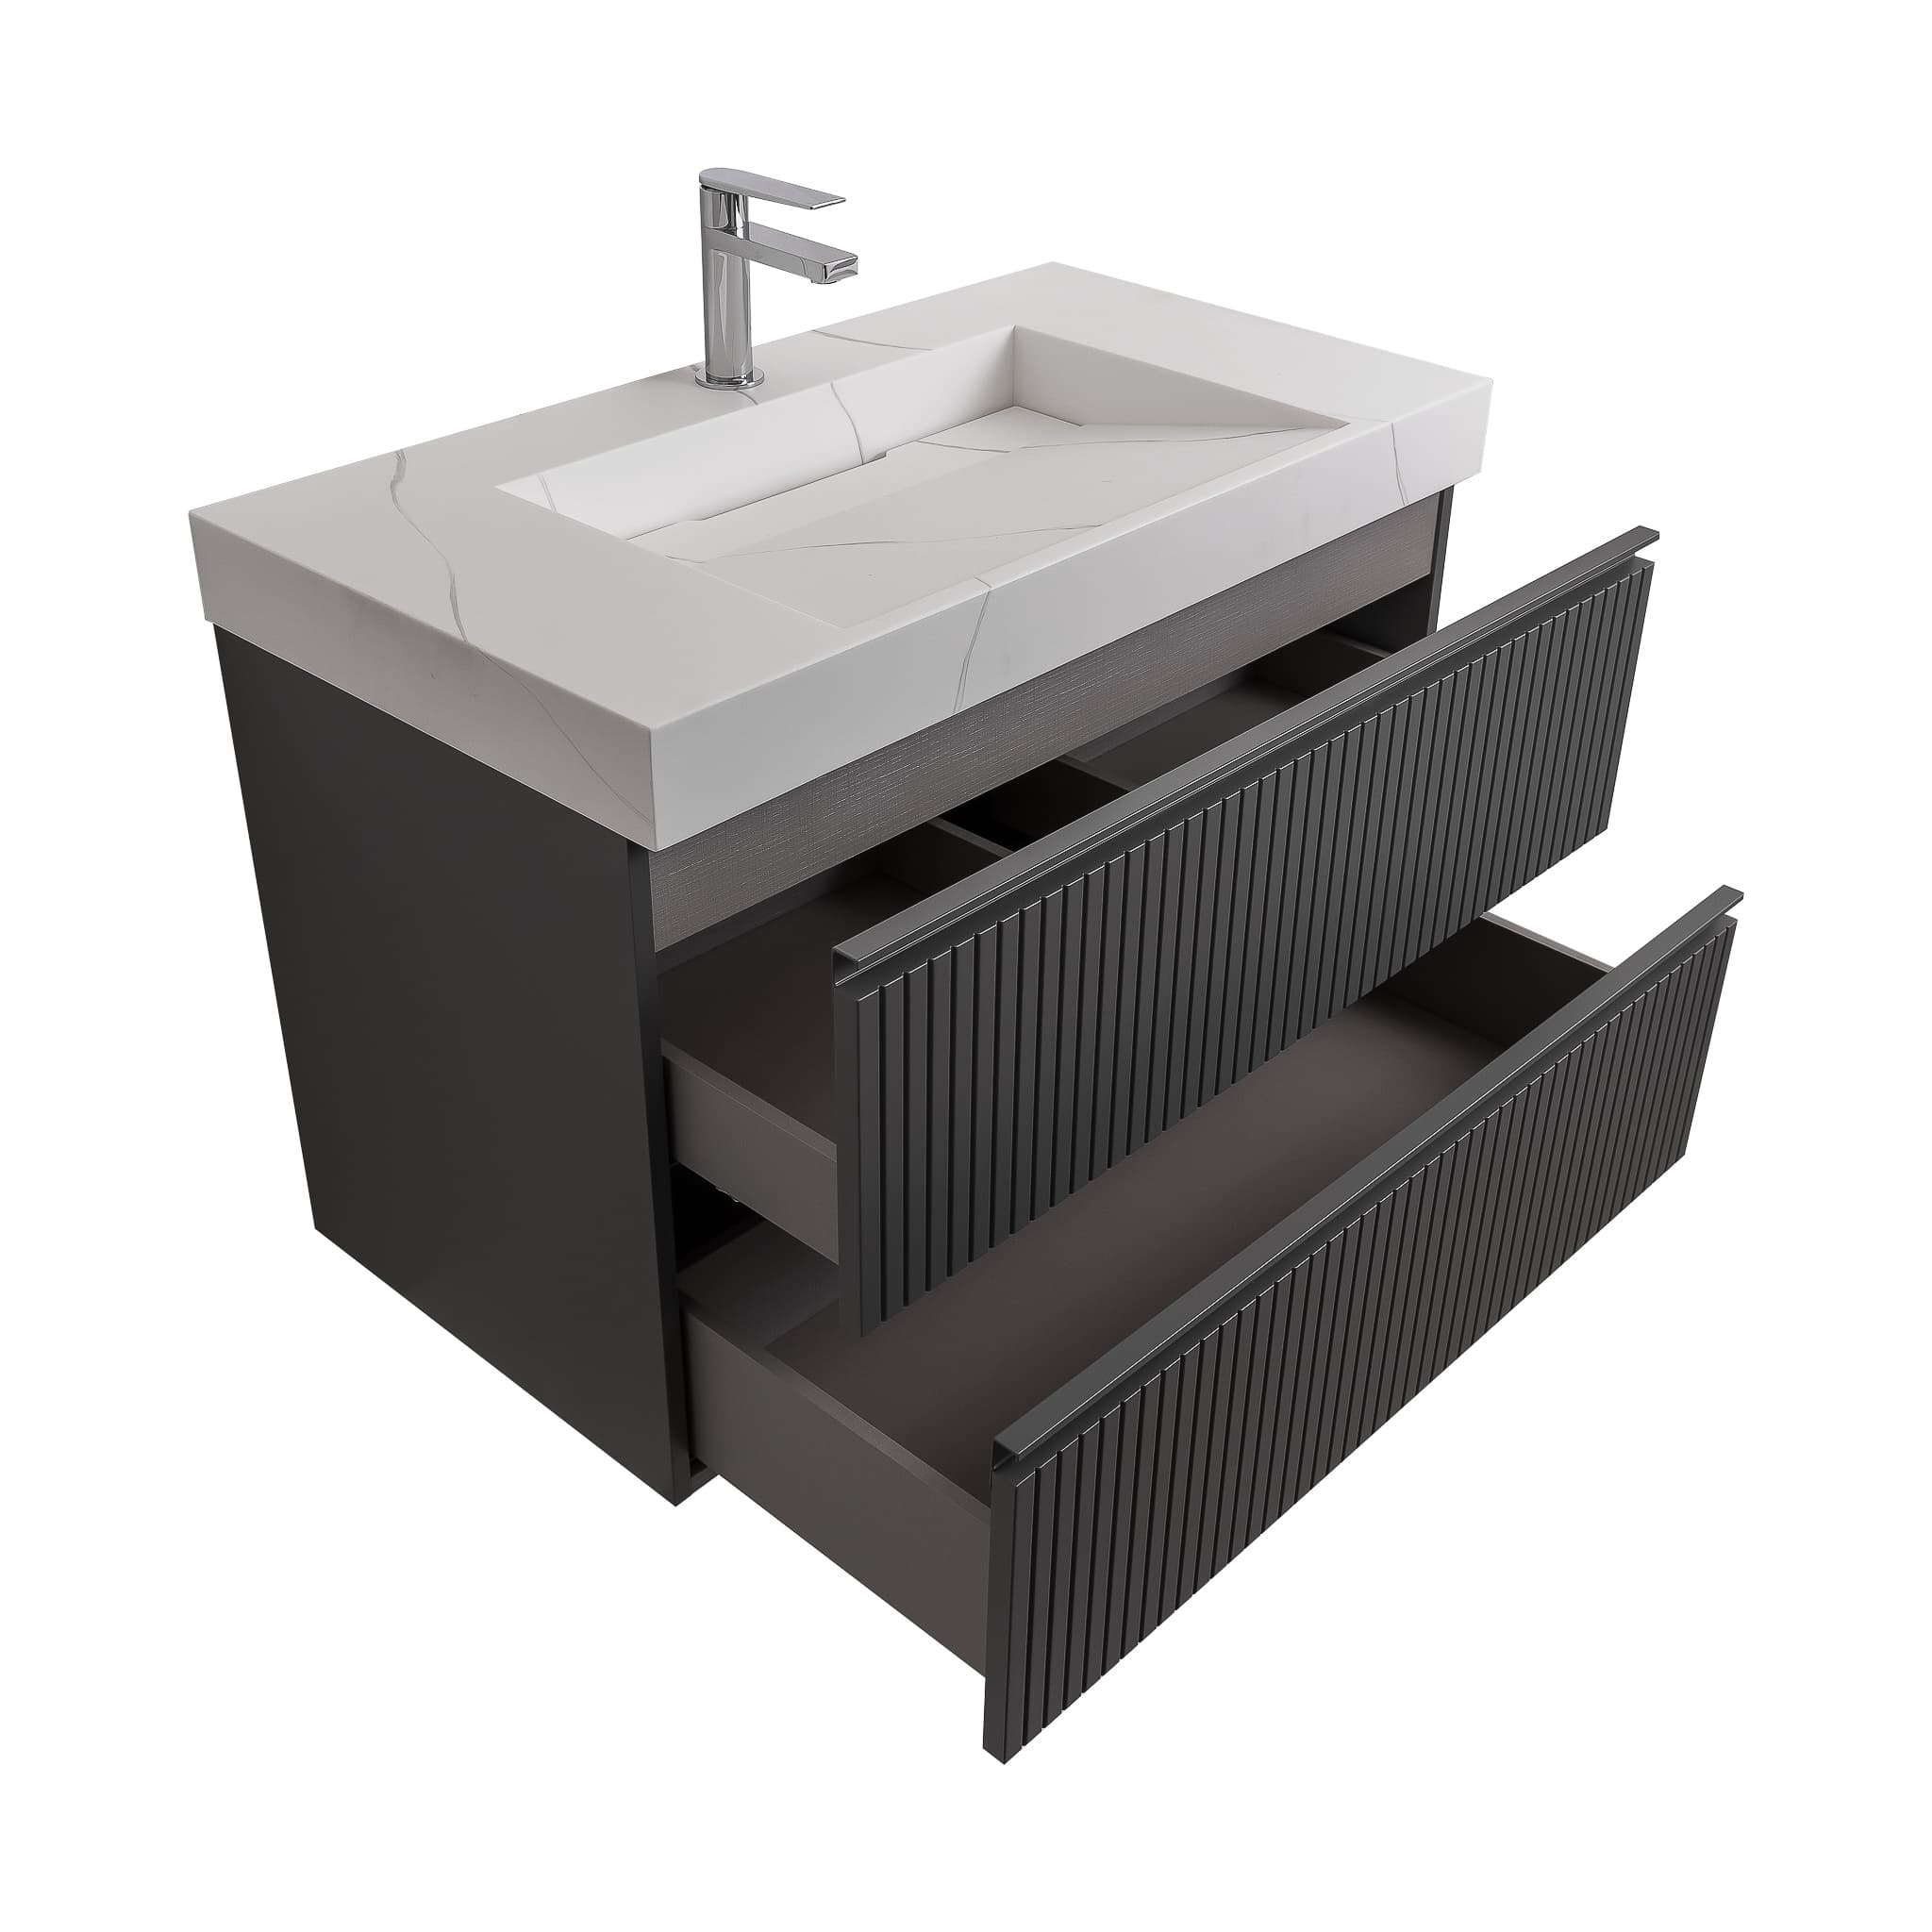 Ares 39.5 Matte Grey Cabinet, Solid Surface Matte White Top Carrara Infinity Sink, Wall Mounted Modern Vanity Set